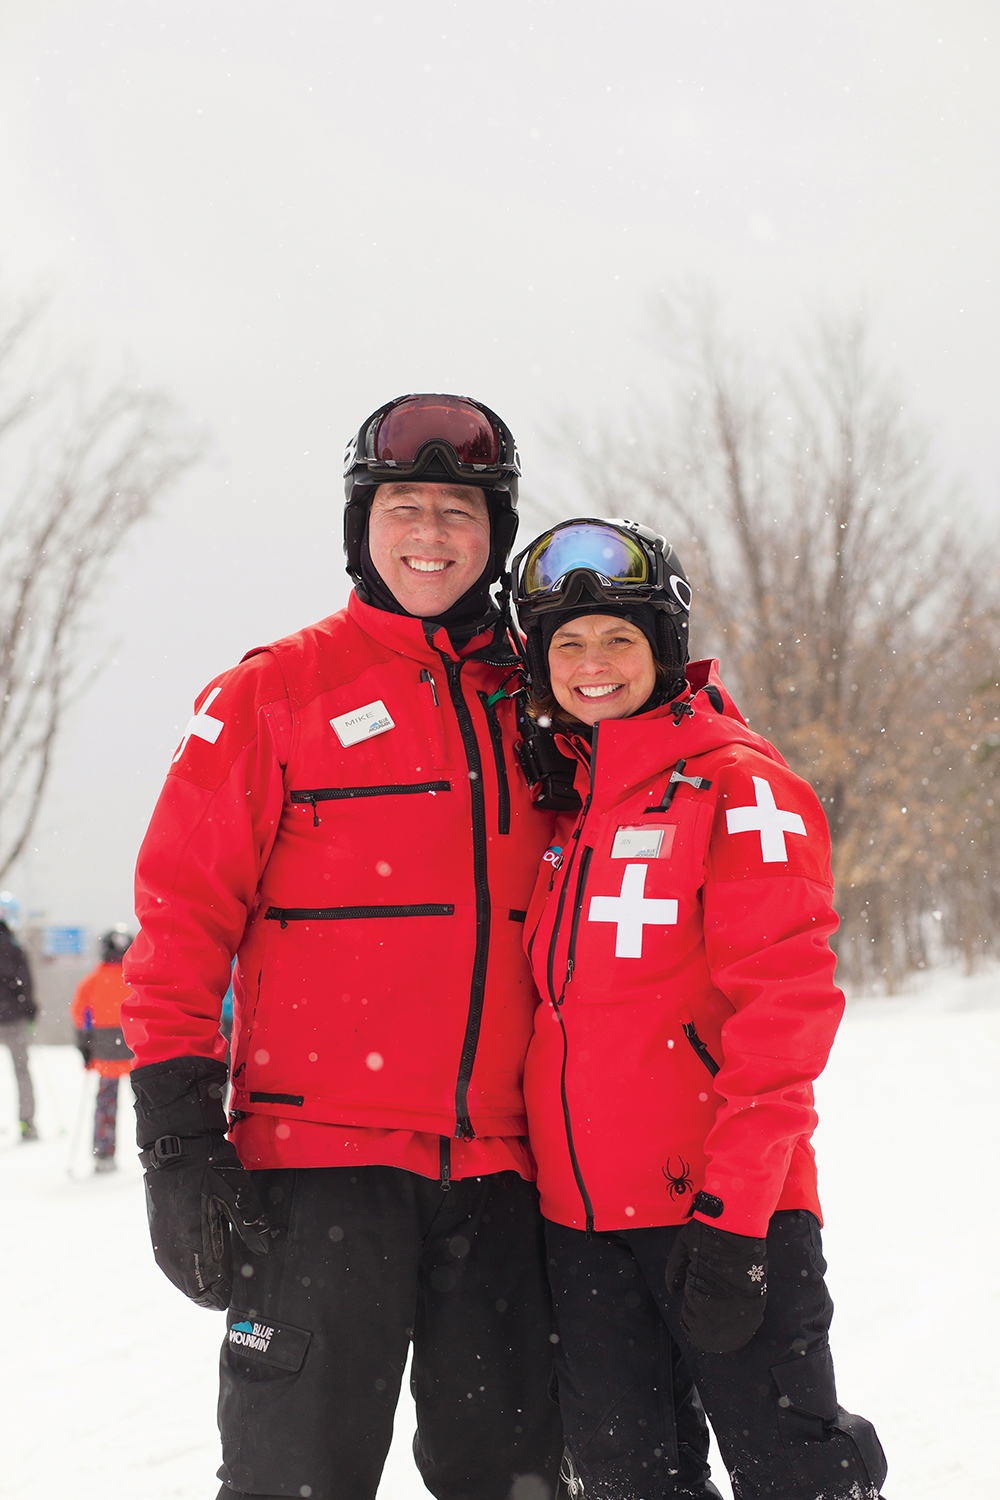 Mike and Jen Scholte have been ski patrollers at Blue Mountain Resort on and off for 12 years.